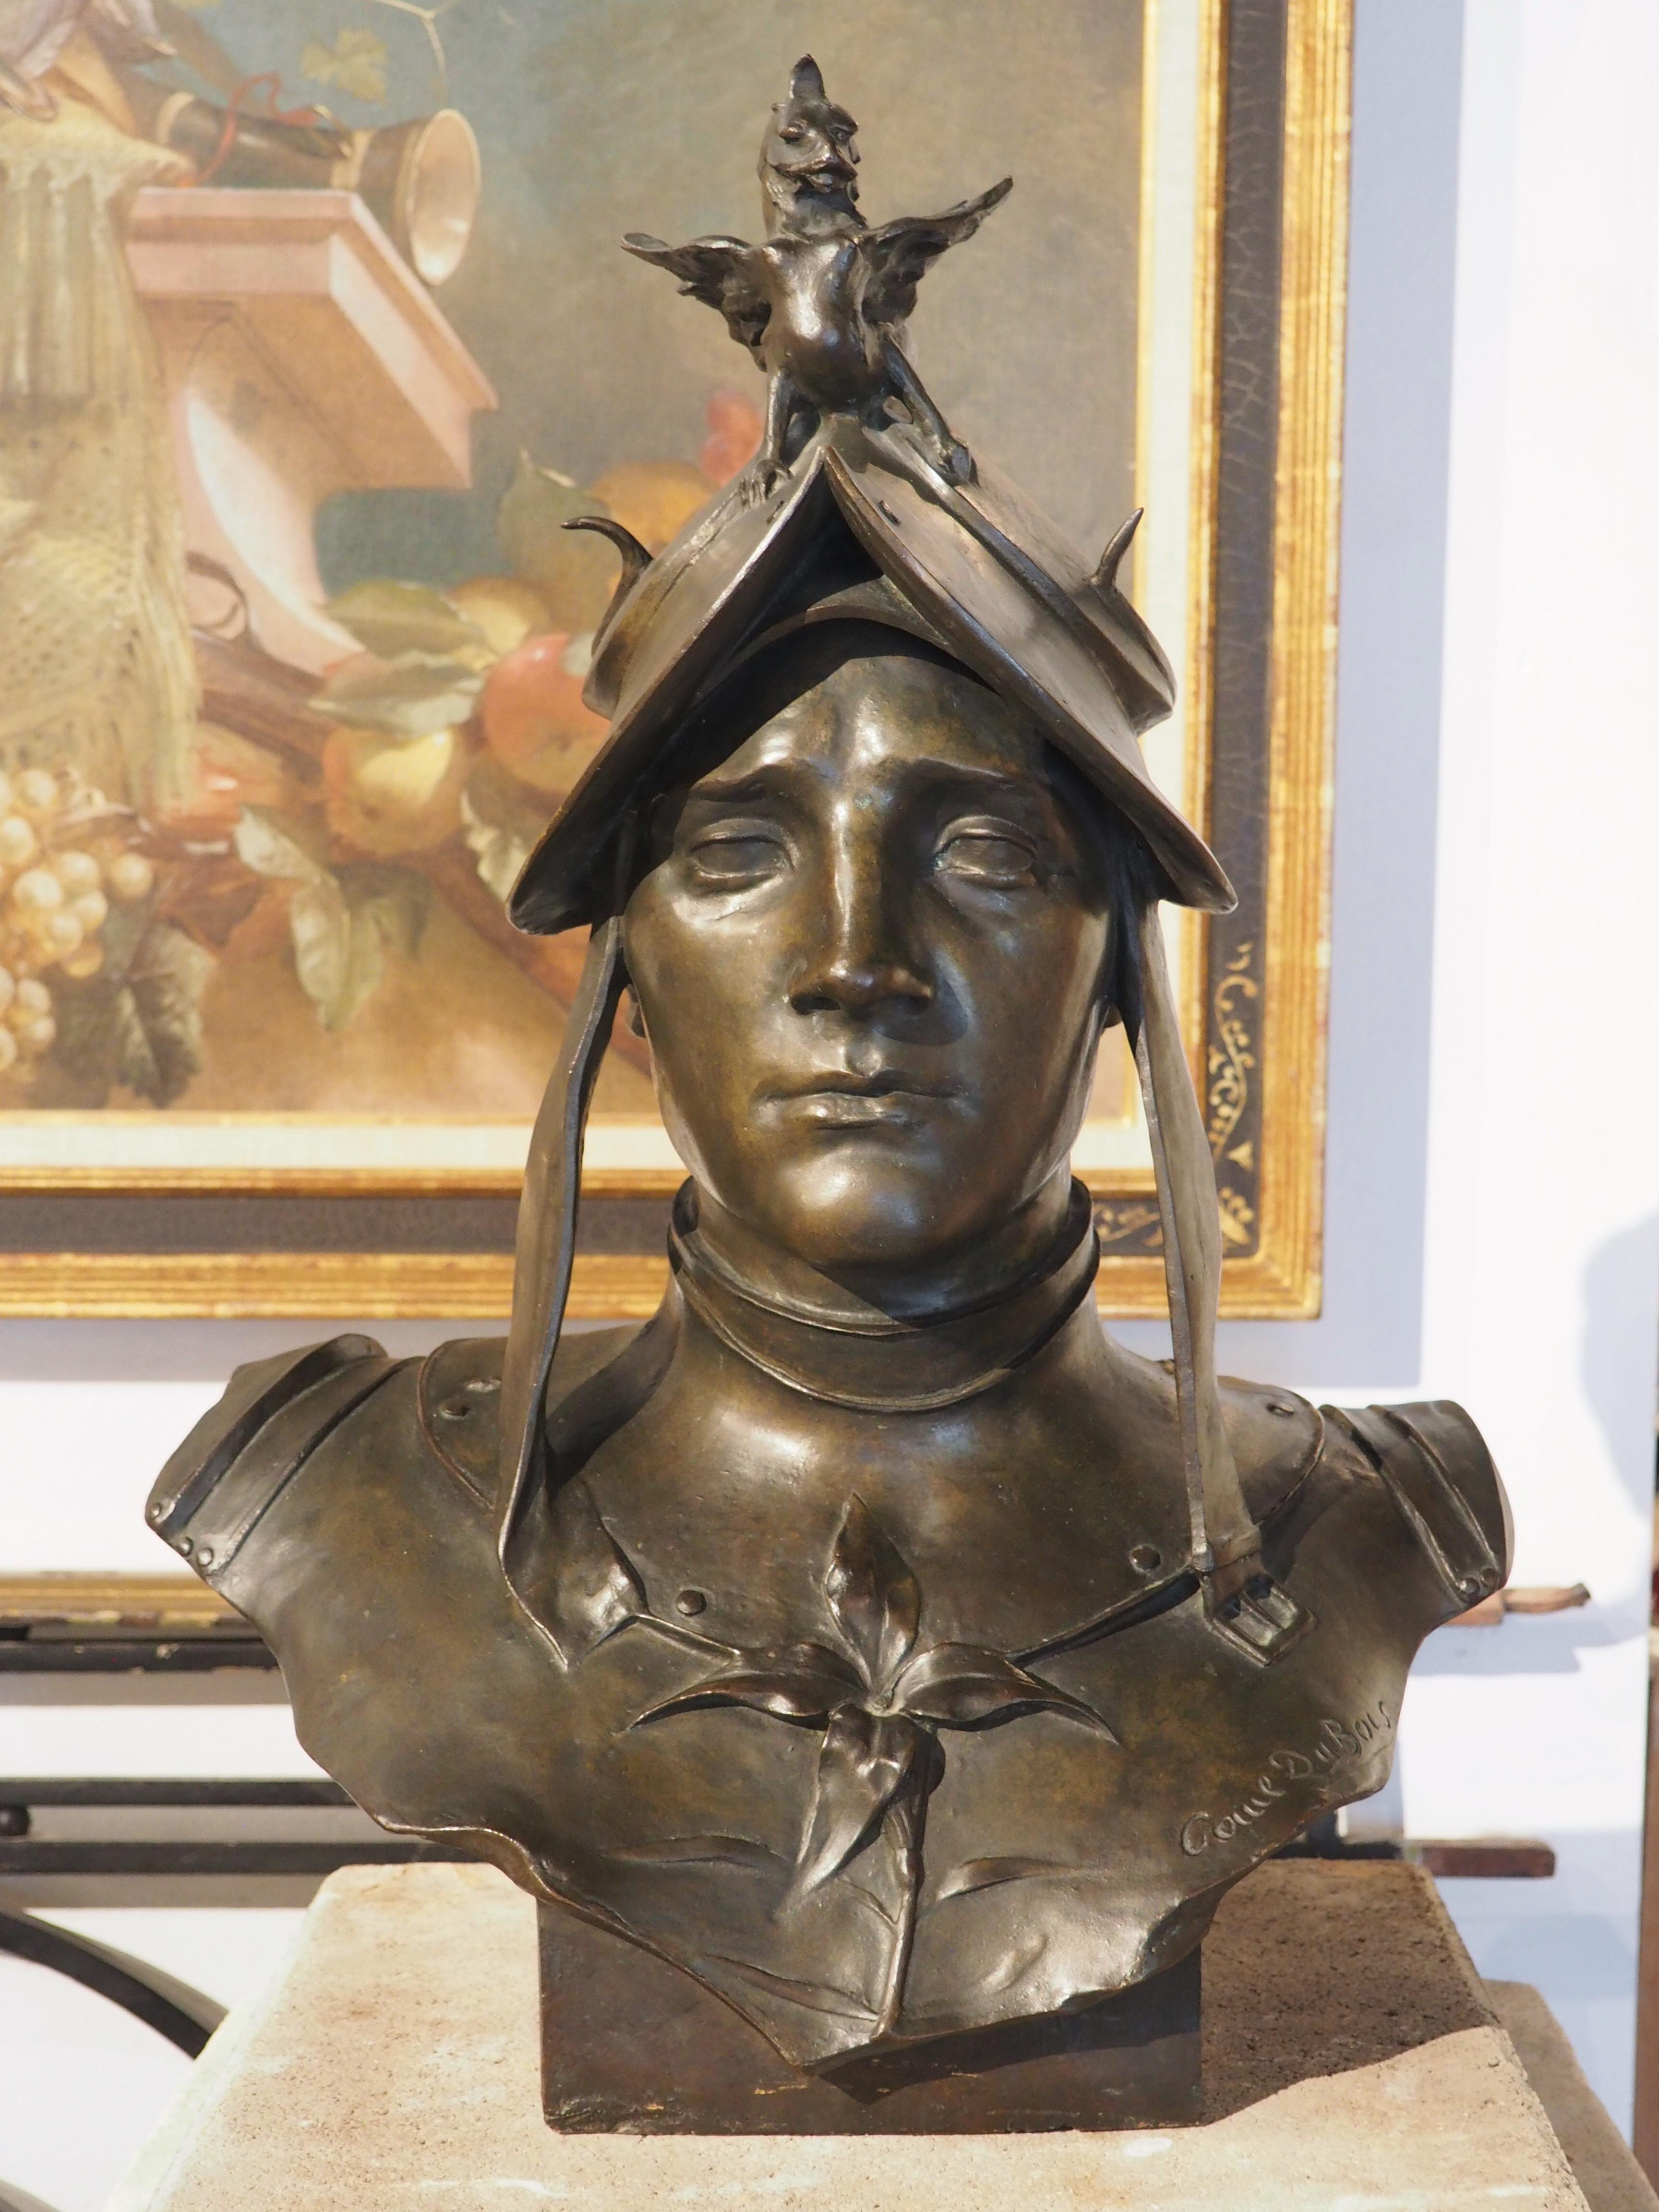 Cast in France during the 1800s, this patinated bronze bust depicts a woman soldier, based on the style of hair and the ceremonial accoutrement on the armor cuirass. Our stoic soldier has a four-petal flower adorning the breastplate (to the viewer’s